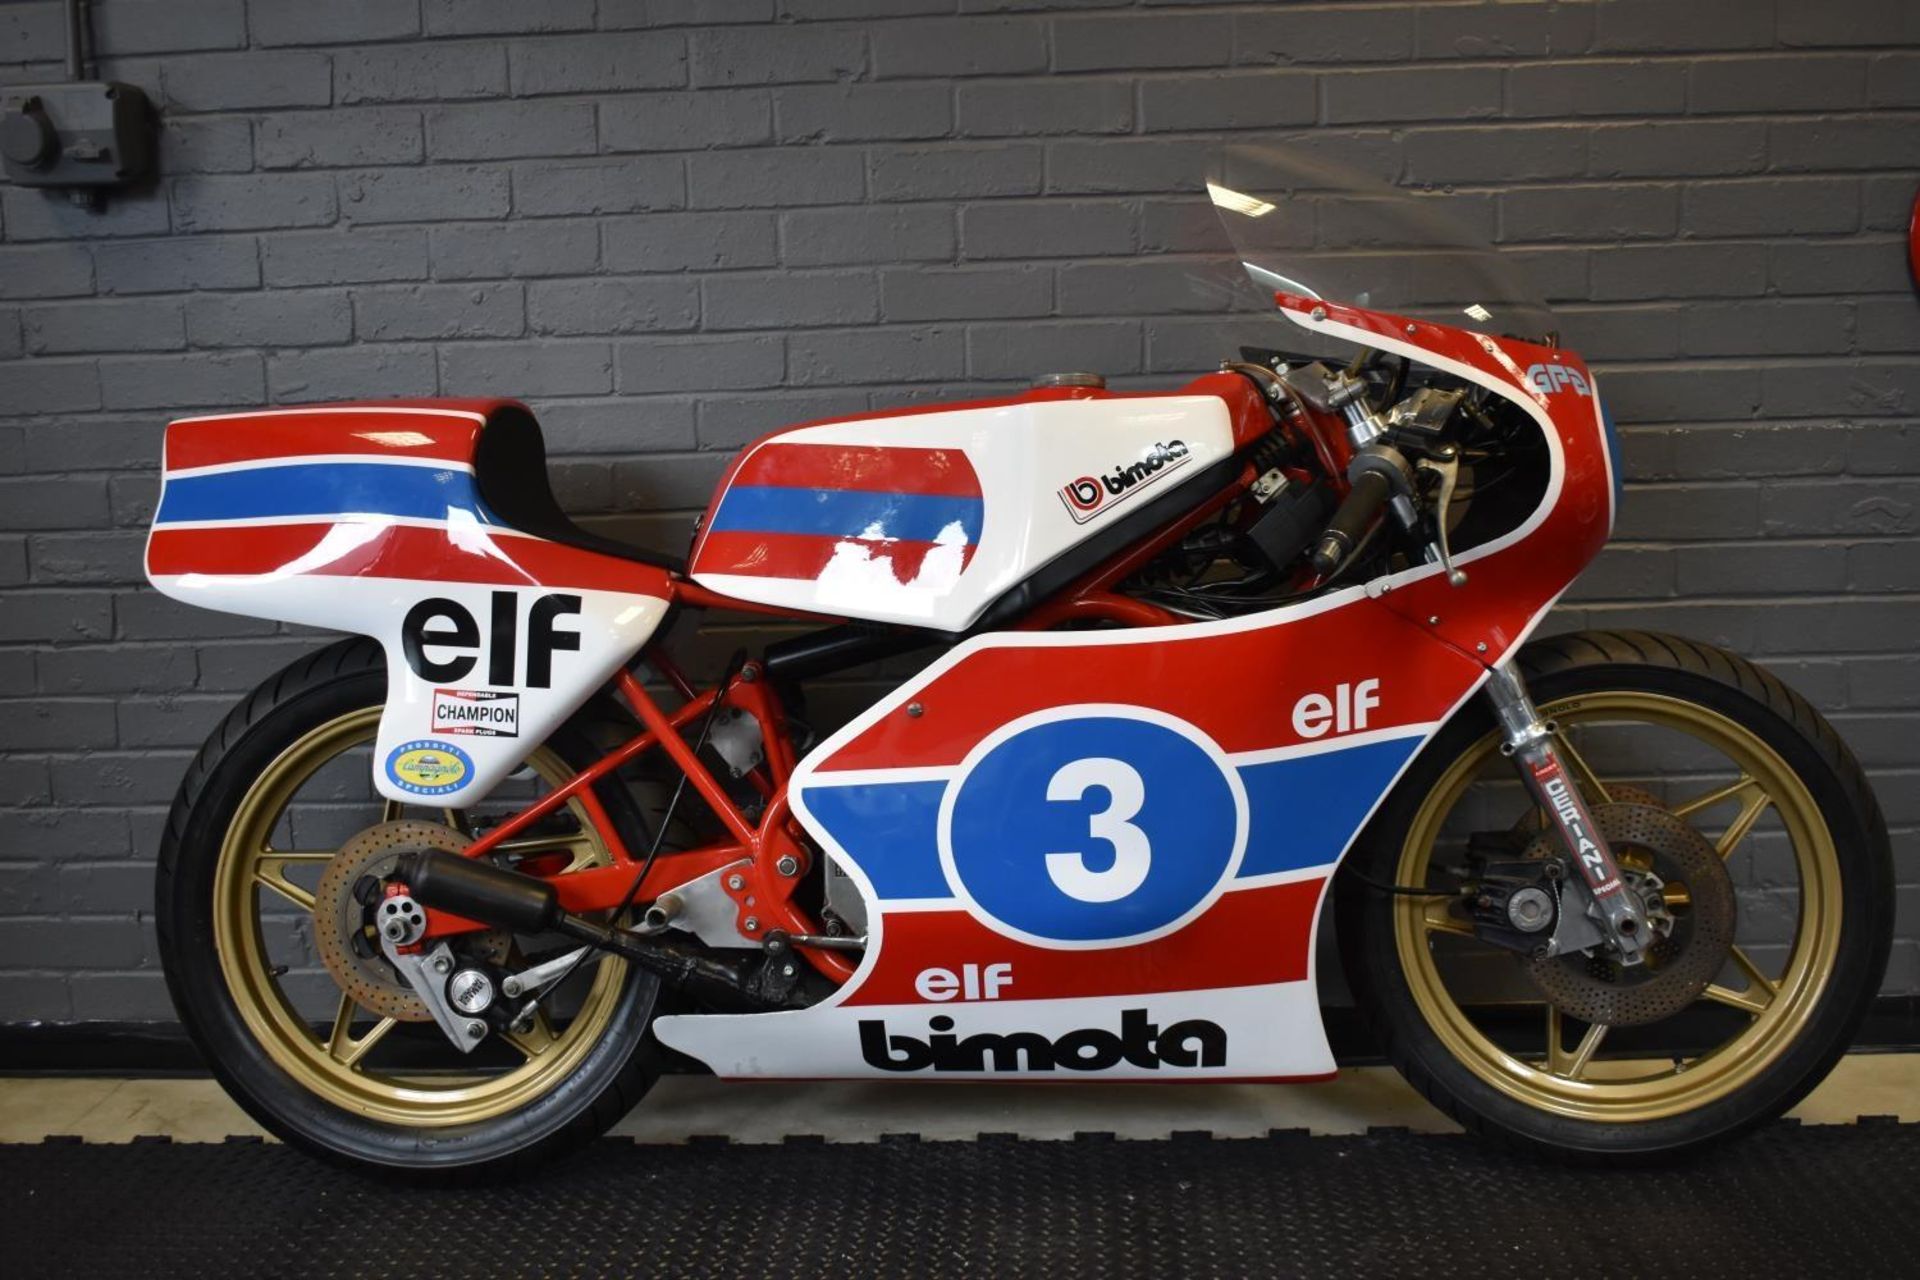 A 1977 Bimota YB1, unregistered, red/white and blue. This Bimota has formed part of a significant